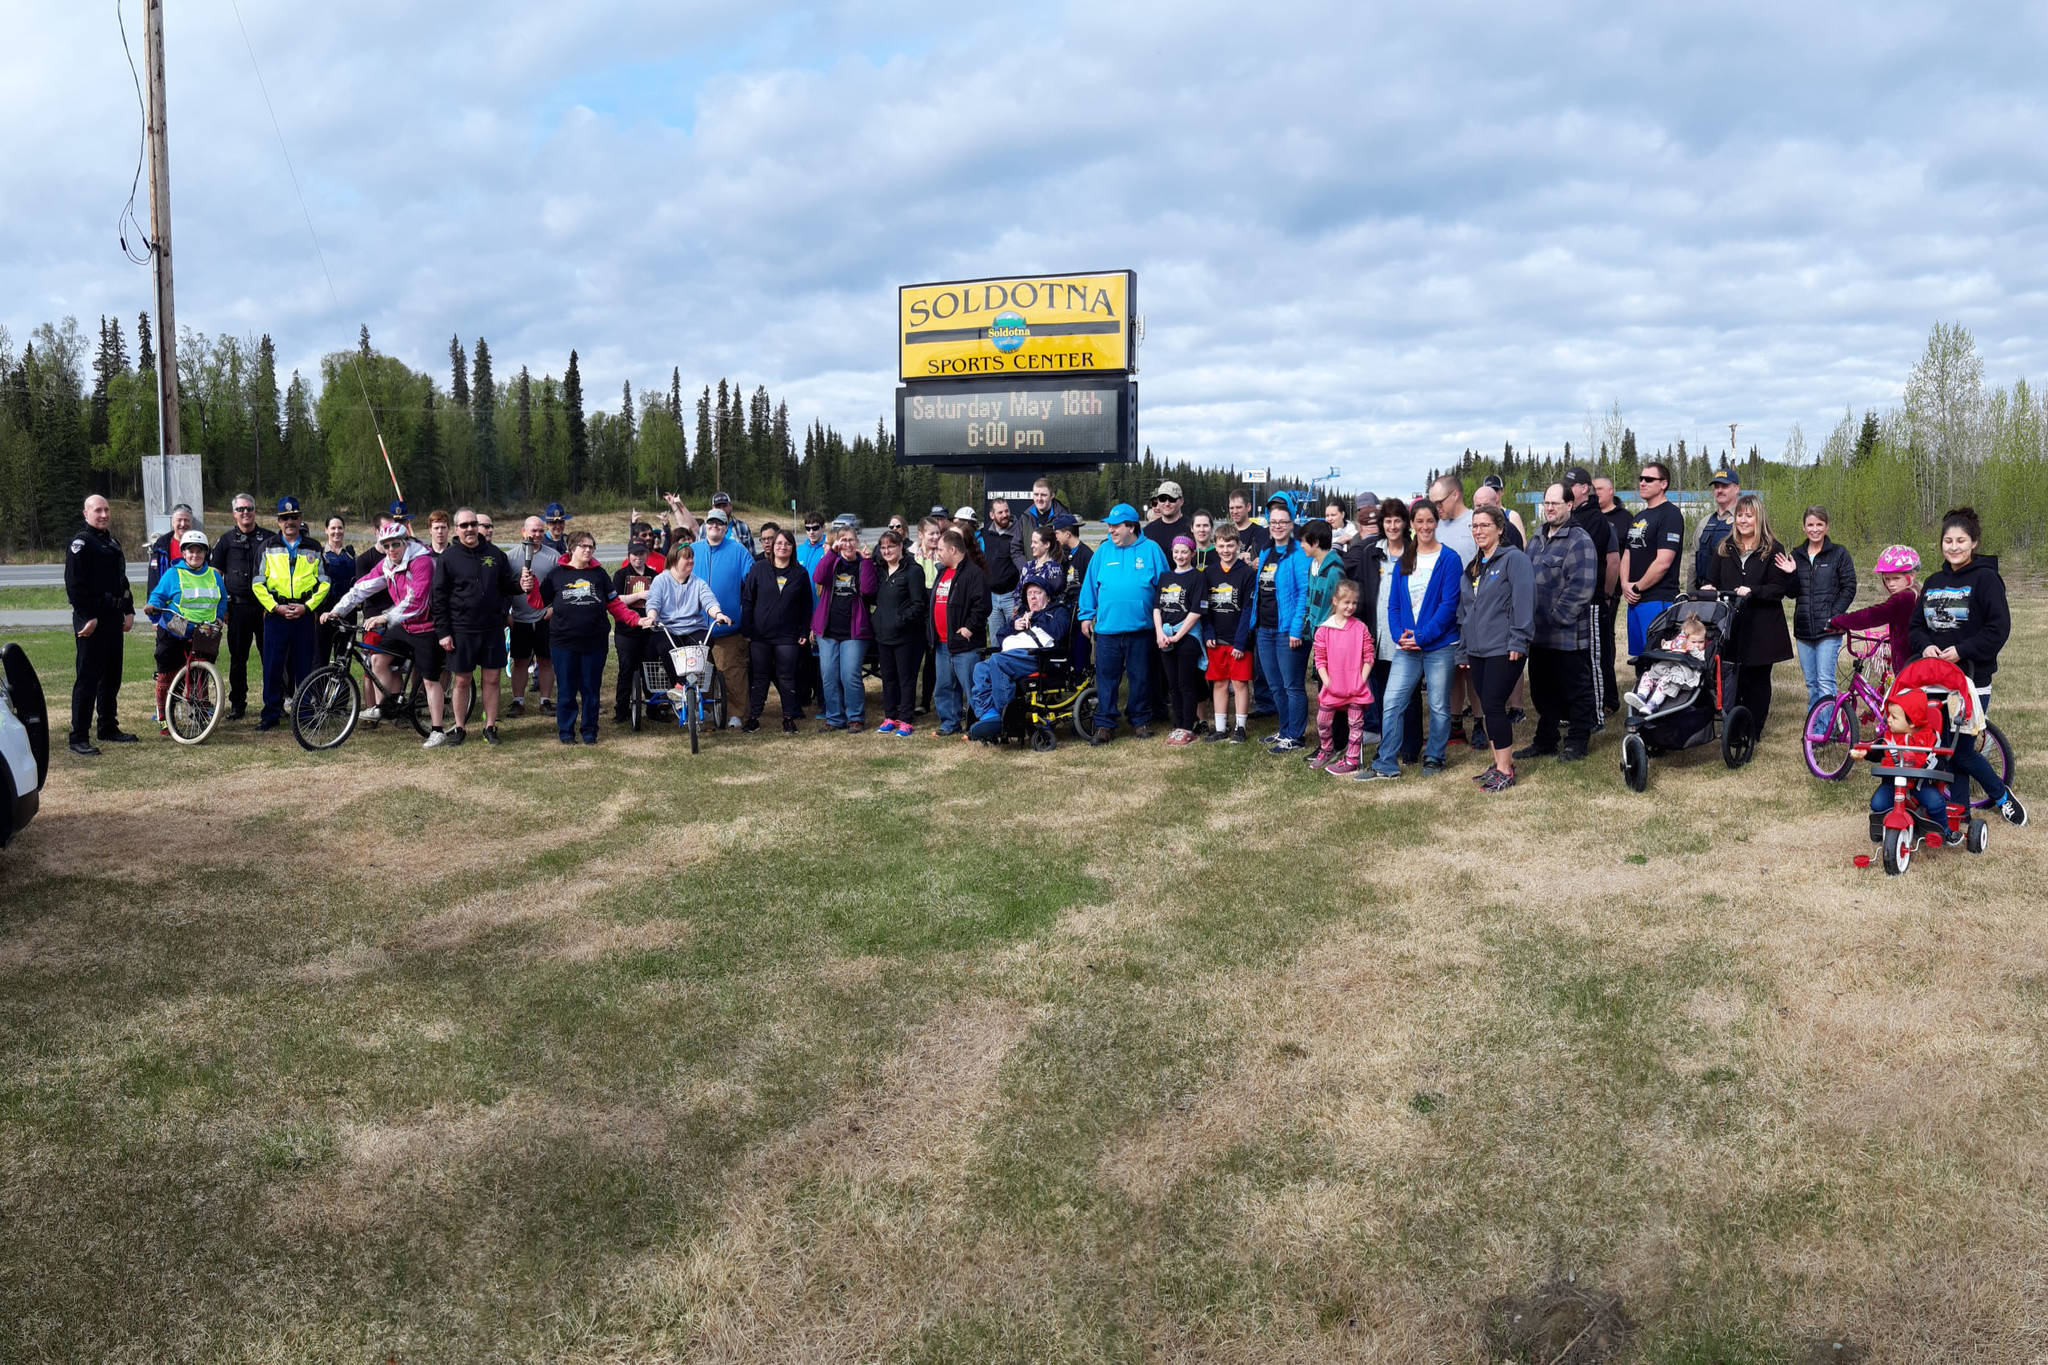 Participants for the annual Special Olympics Torch Run pose for a group photo outside the Soldotna Regional Sports Complex in Soldotna, Alaska on May 18, 2019. (Photo by Brian Mazurek/Peninsula Clarion)